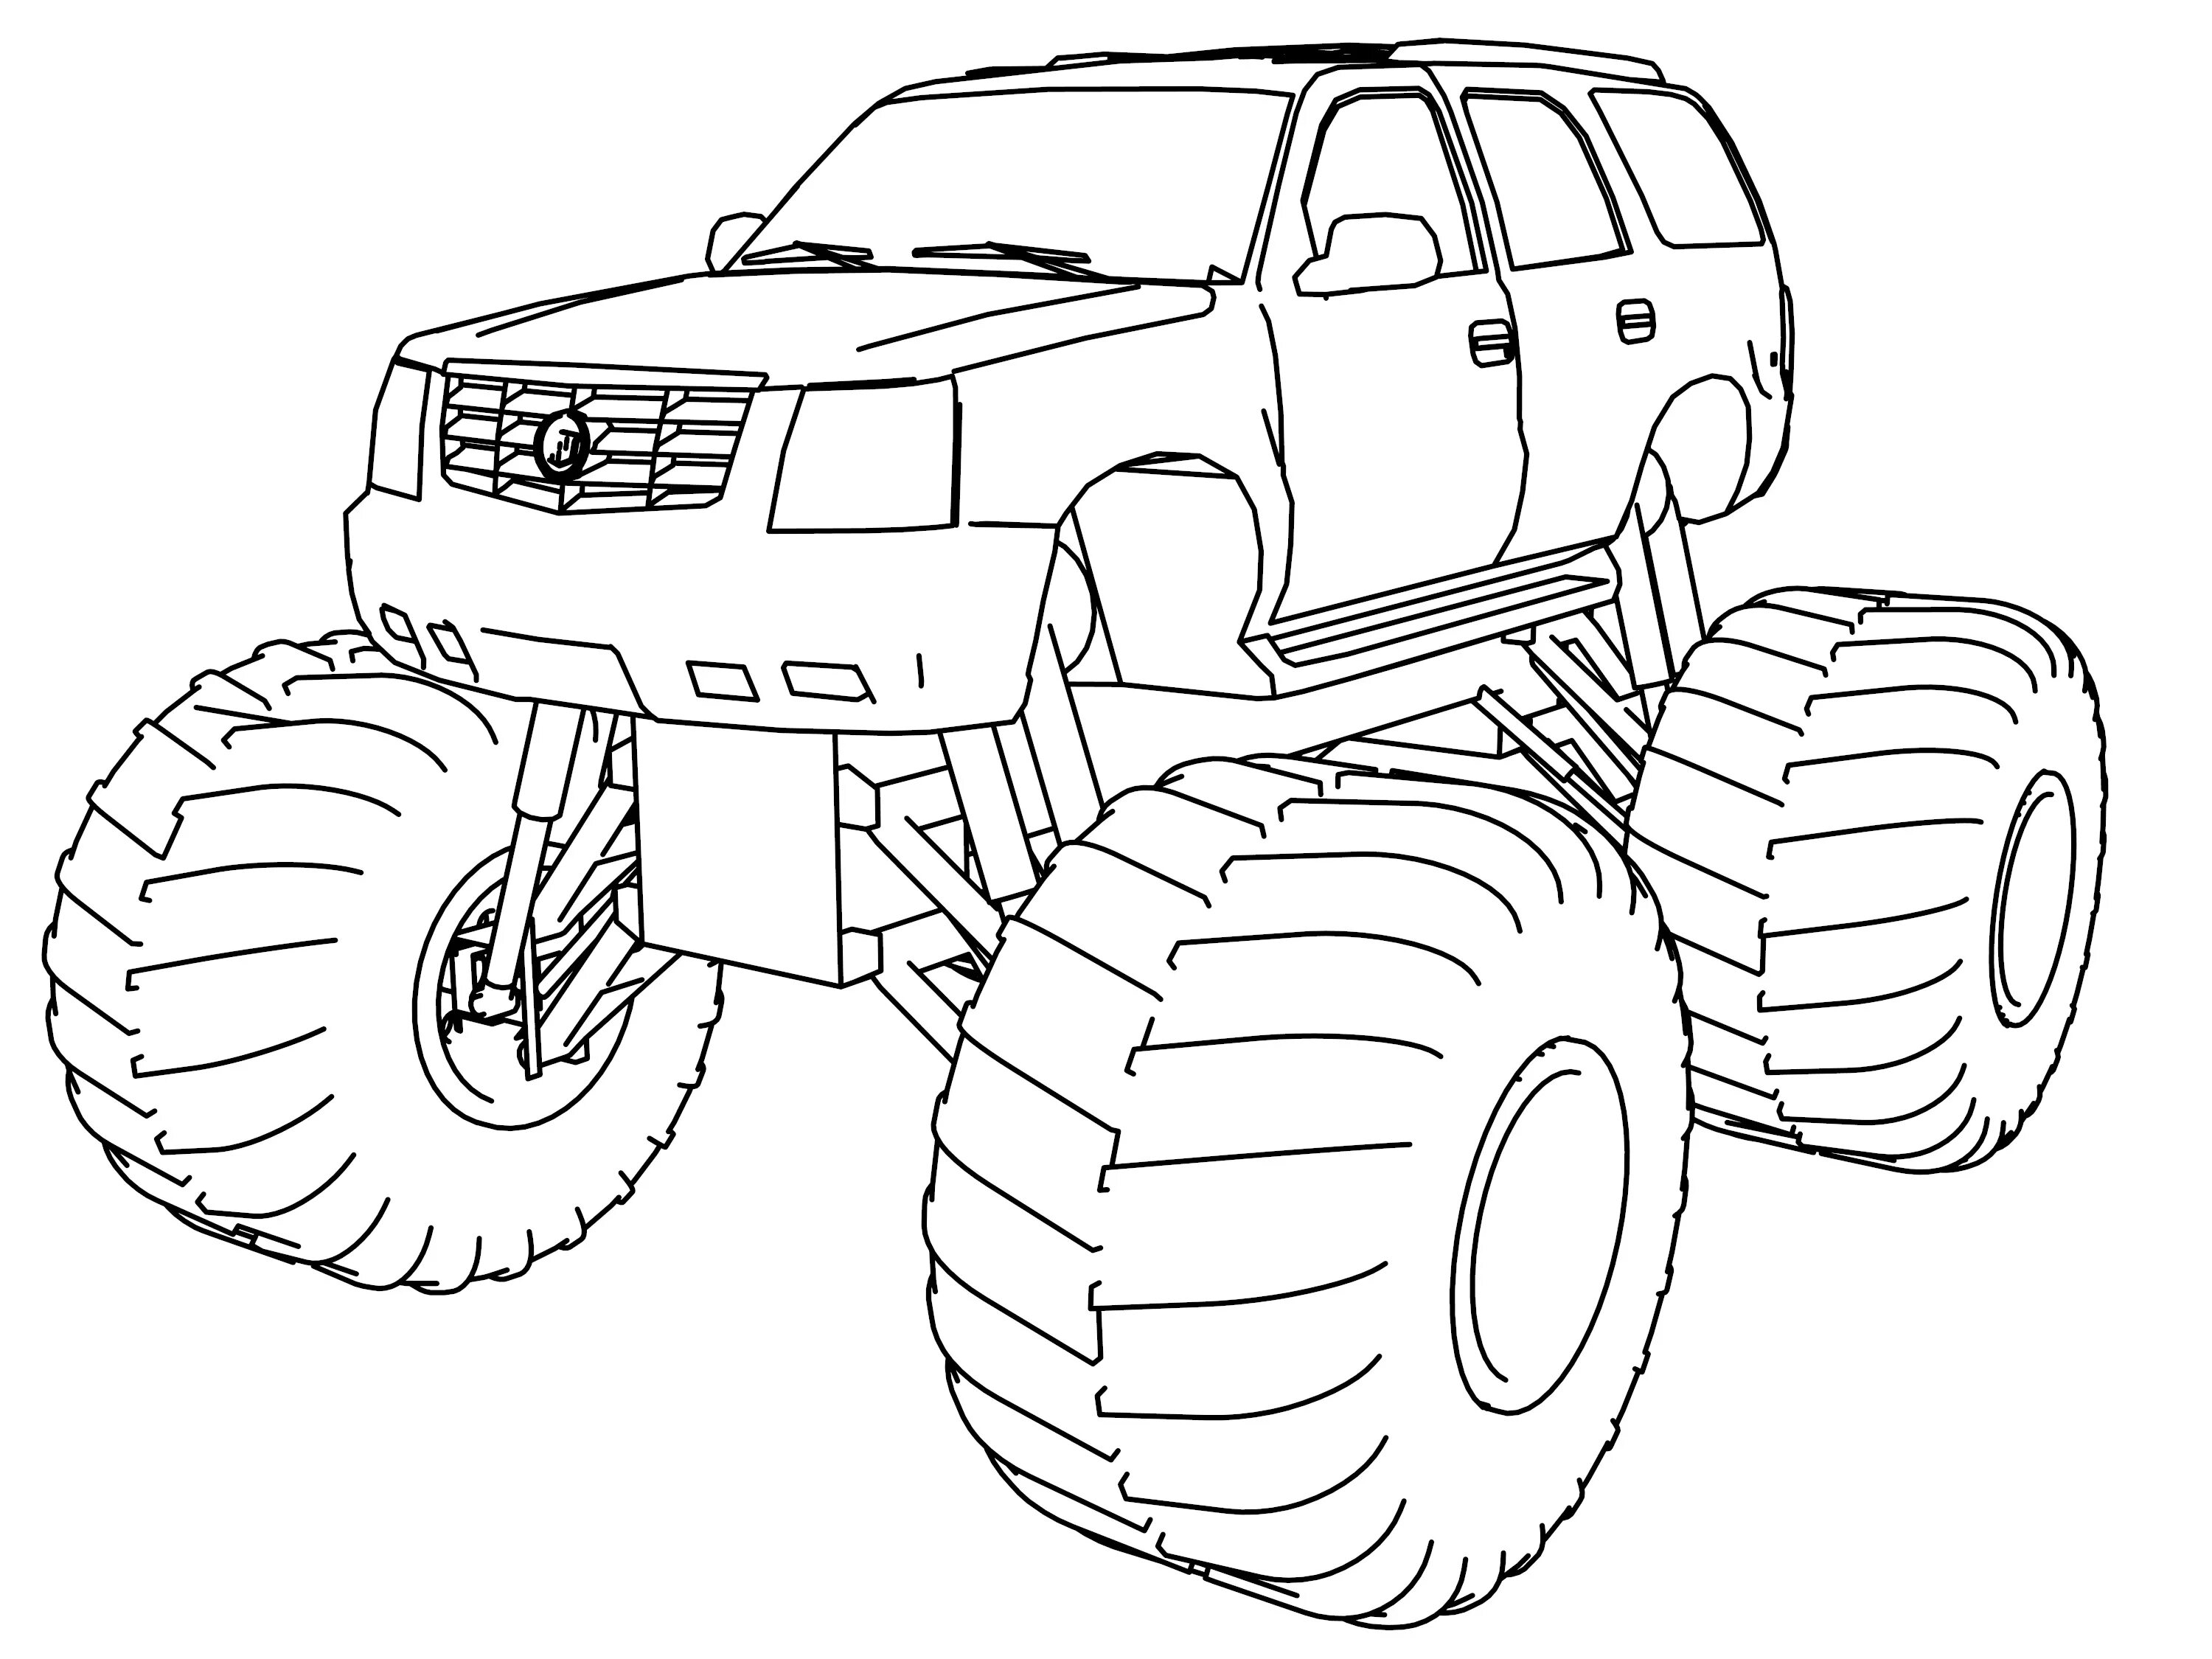 Glowing monster truck coloring page for boys